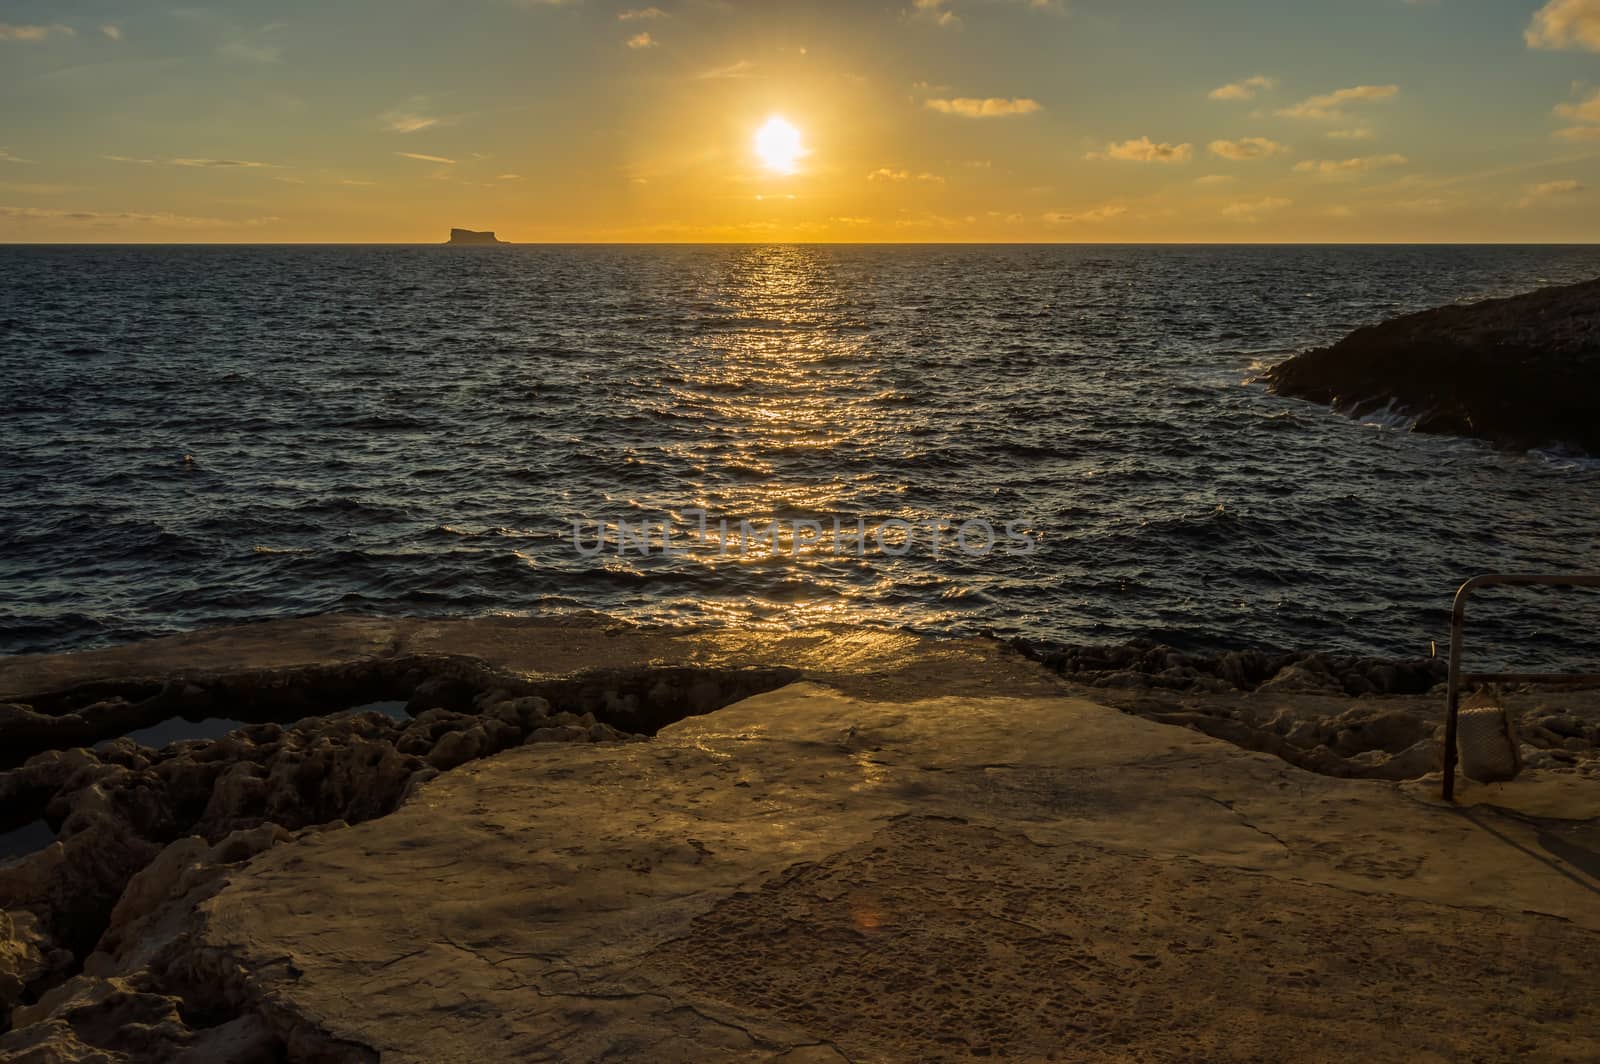 Sunset over the Mediterranean Sea  by Philou1000